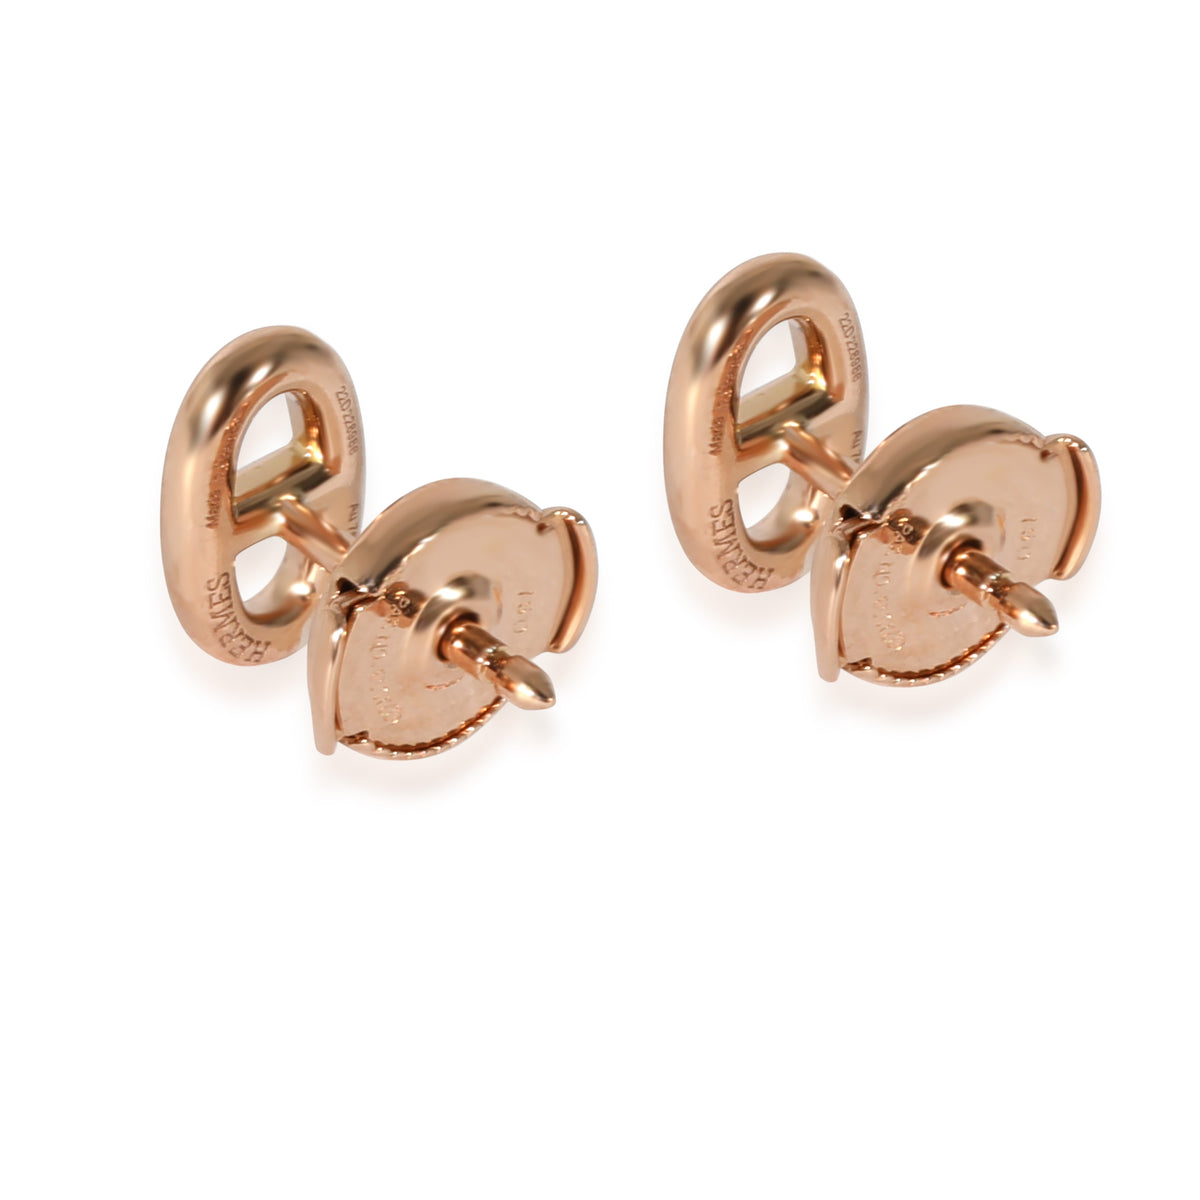 Hermès Chaine d'Ancre Very Small Model Earrings in 18k Rose Gold, myGemma, SG